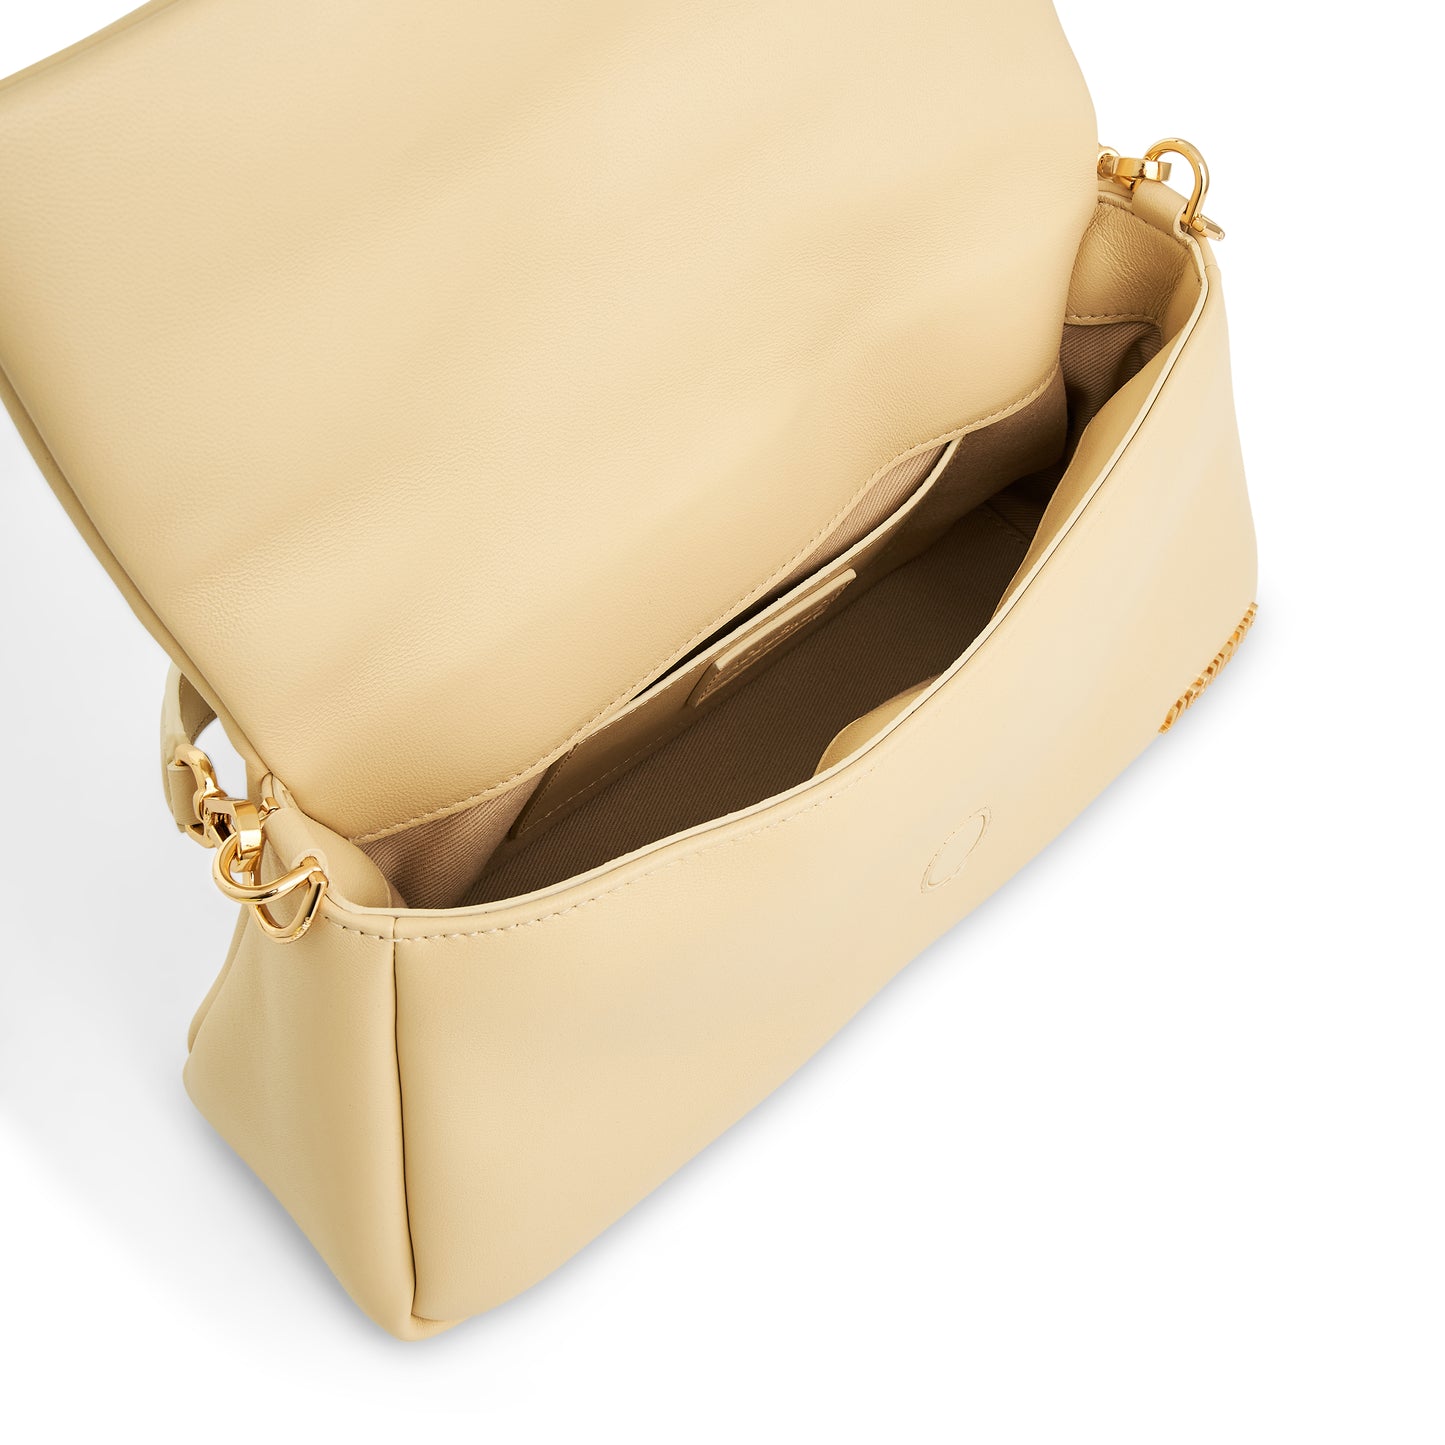 Le Bambimou Leather Bag in Ivory